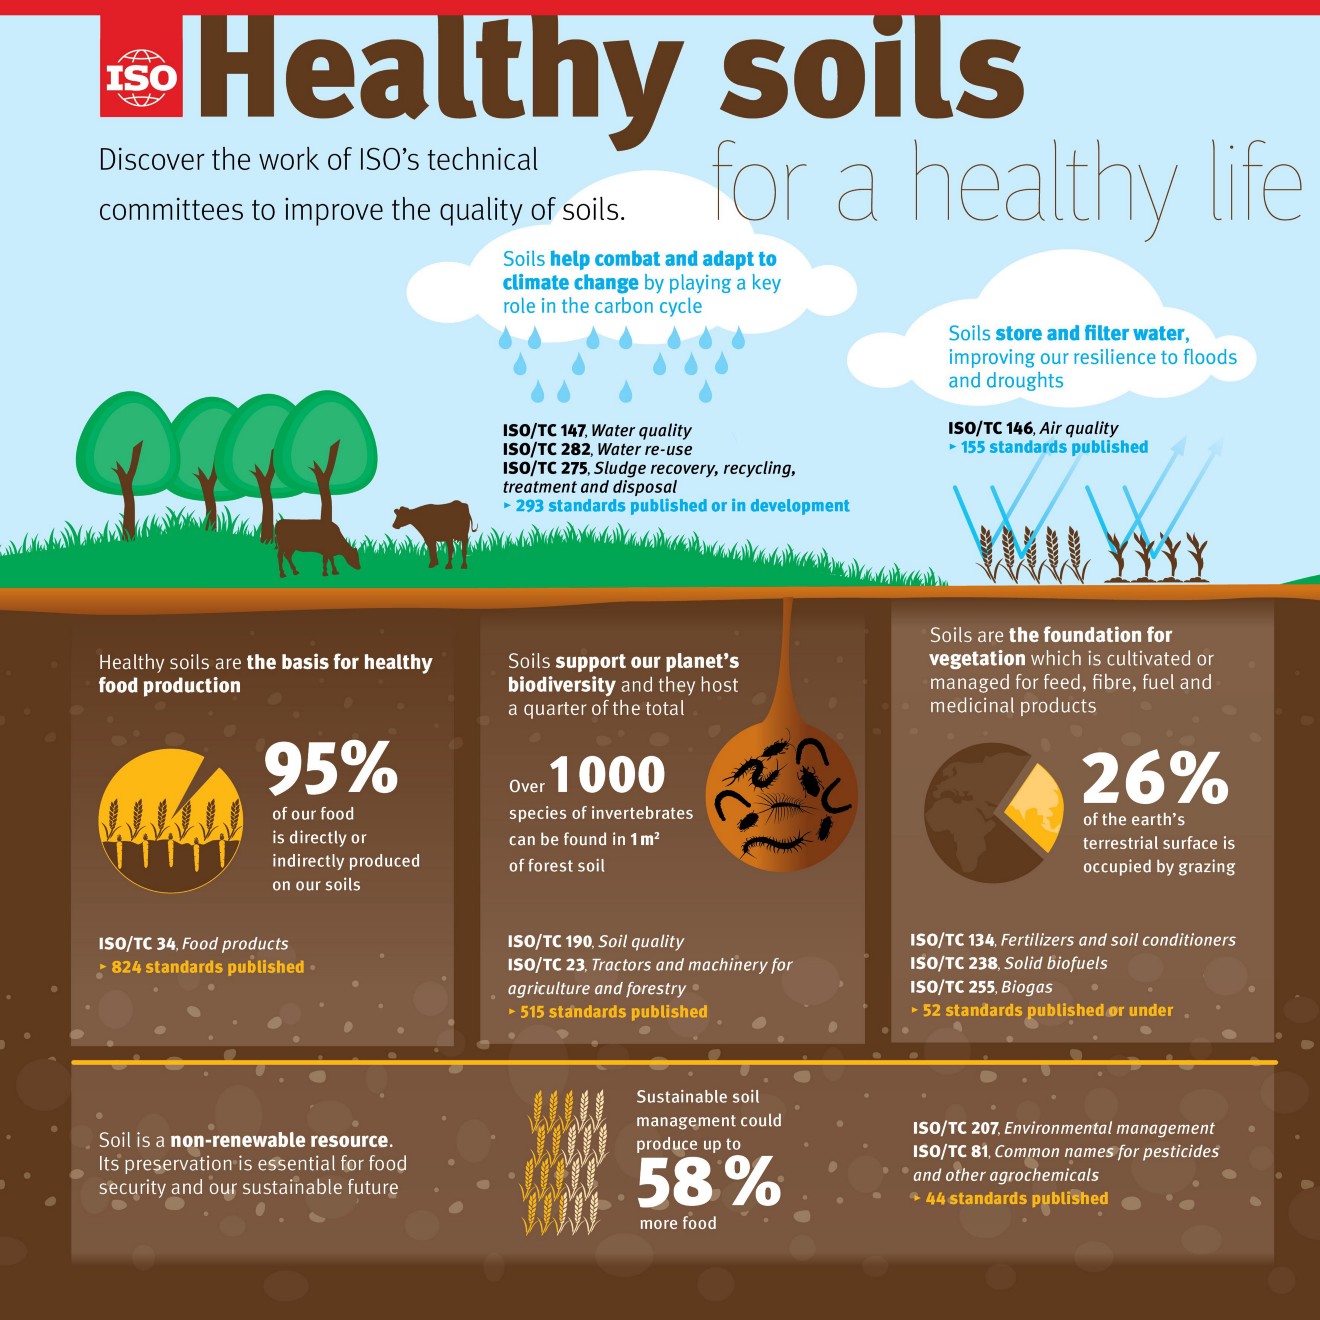 (Source: https://www.inxsoftware.com/news/environmental-management-and-healthy-soils-infographic/)